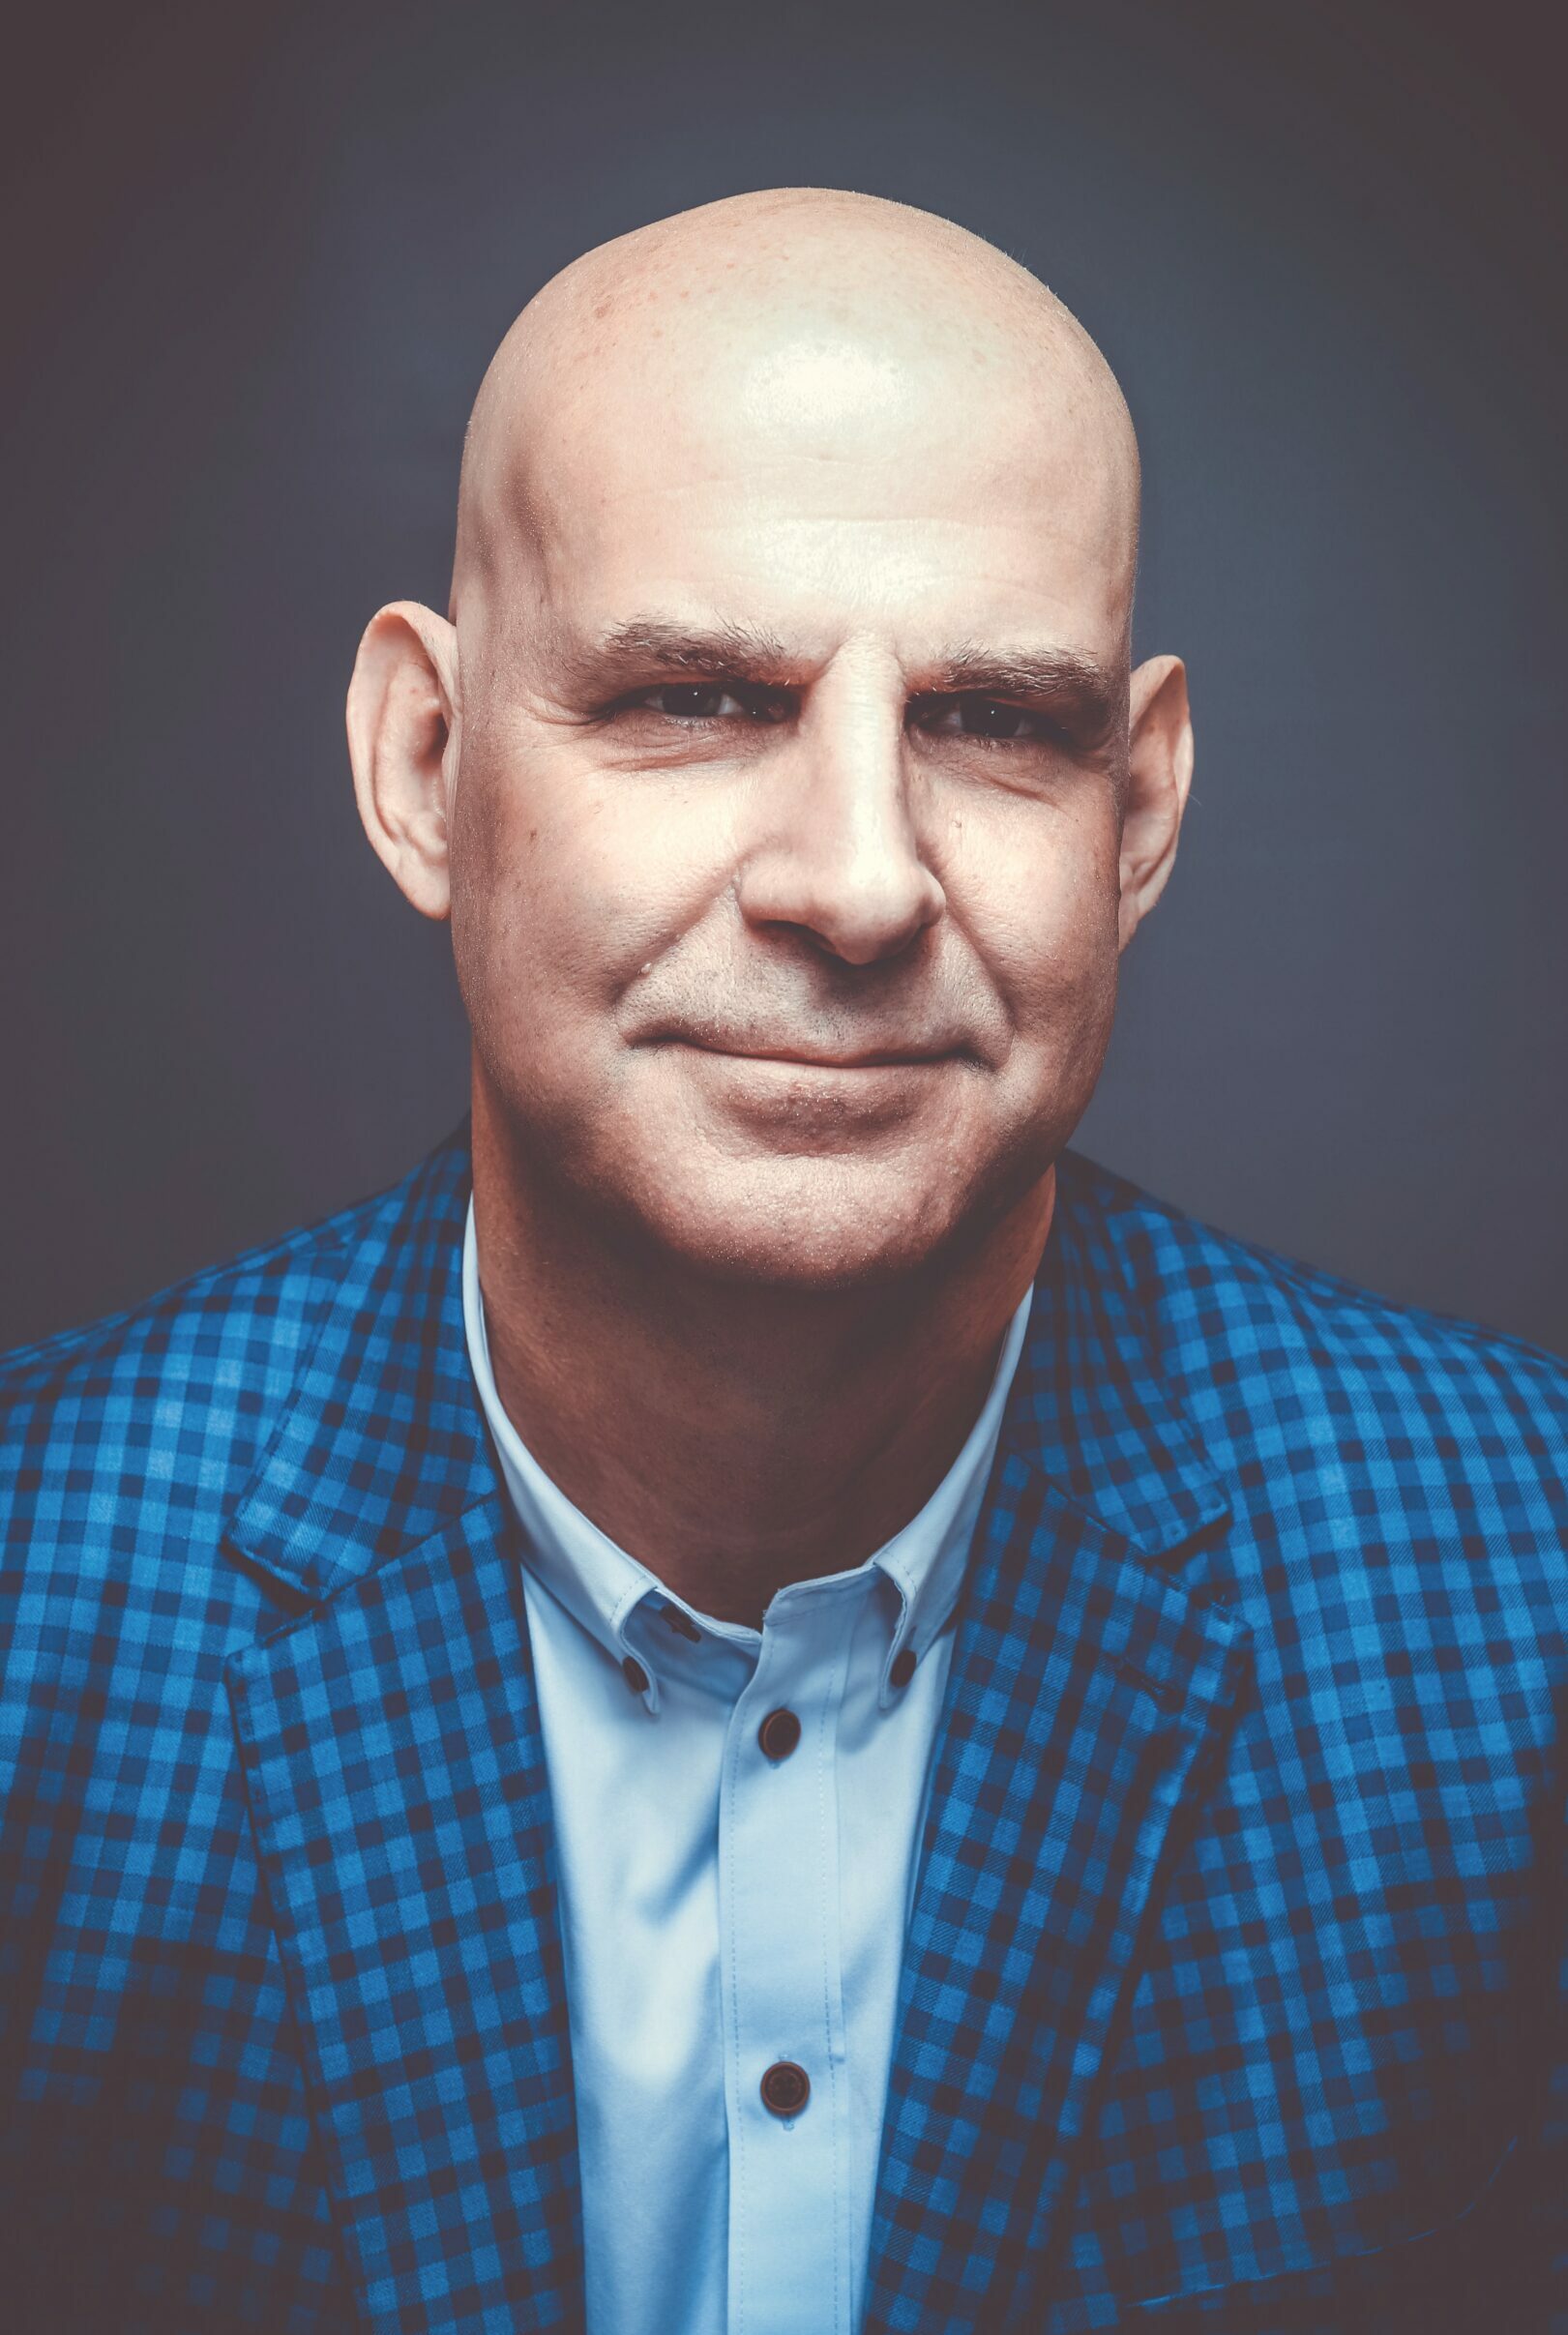 CANNES, FRANCE - APRIL 7: Writer Harlan Coben is photographed for Self Assignment, on April, 2018 in Cannes, France. (Photo by Olivier Vigerie/Contour by Getty Images). (EDITOR'S NOTE: Photo has been digitally retouched).